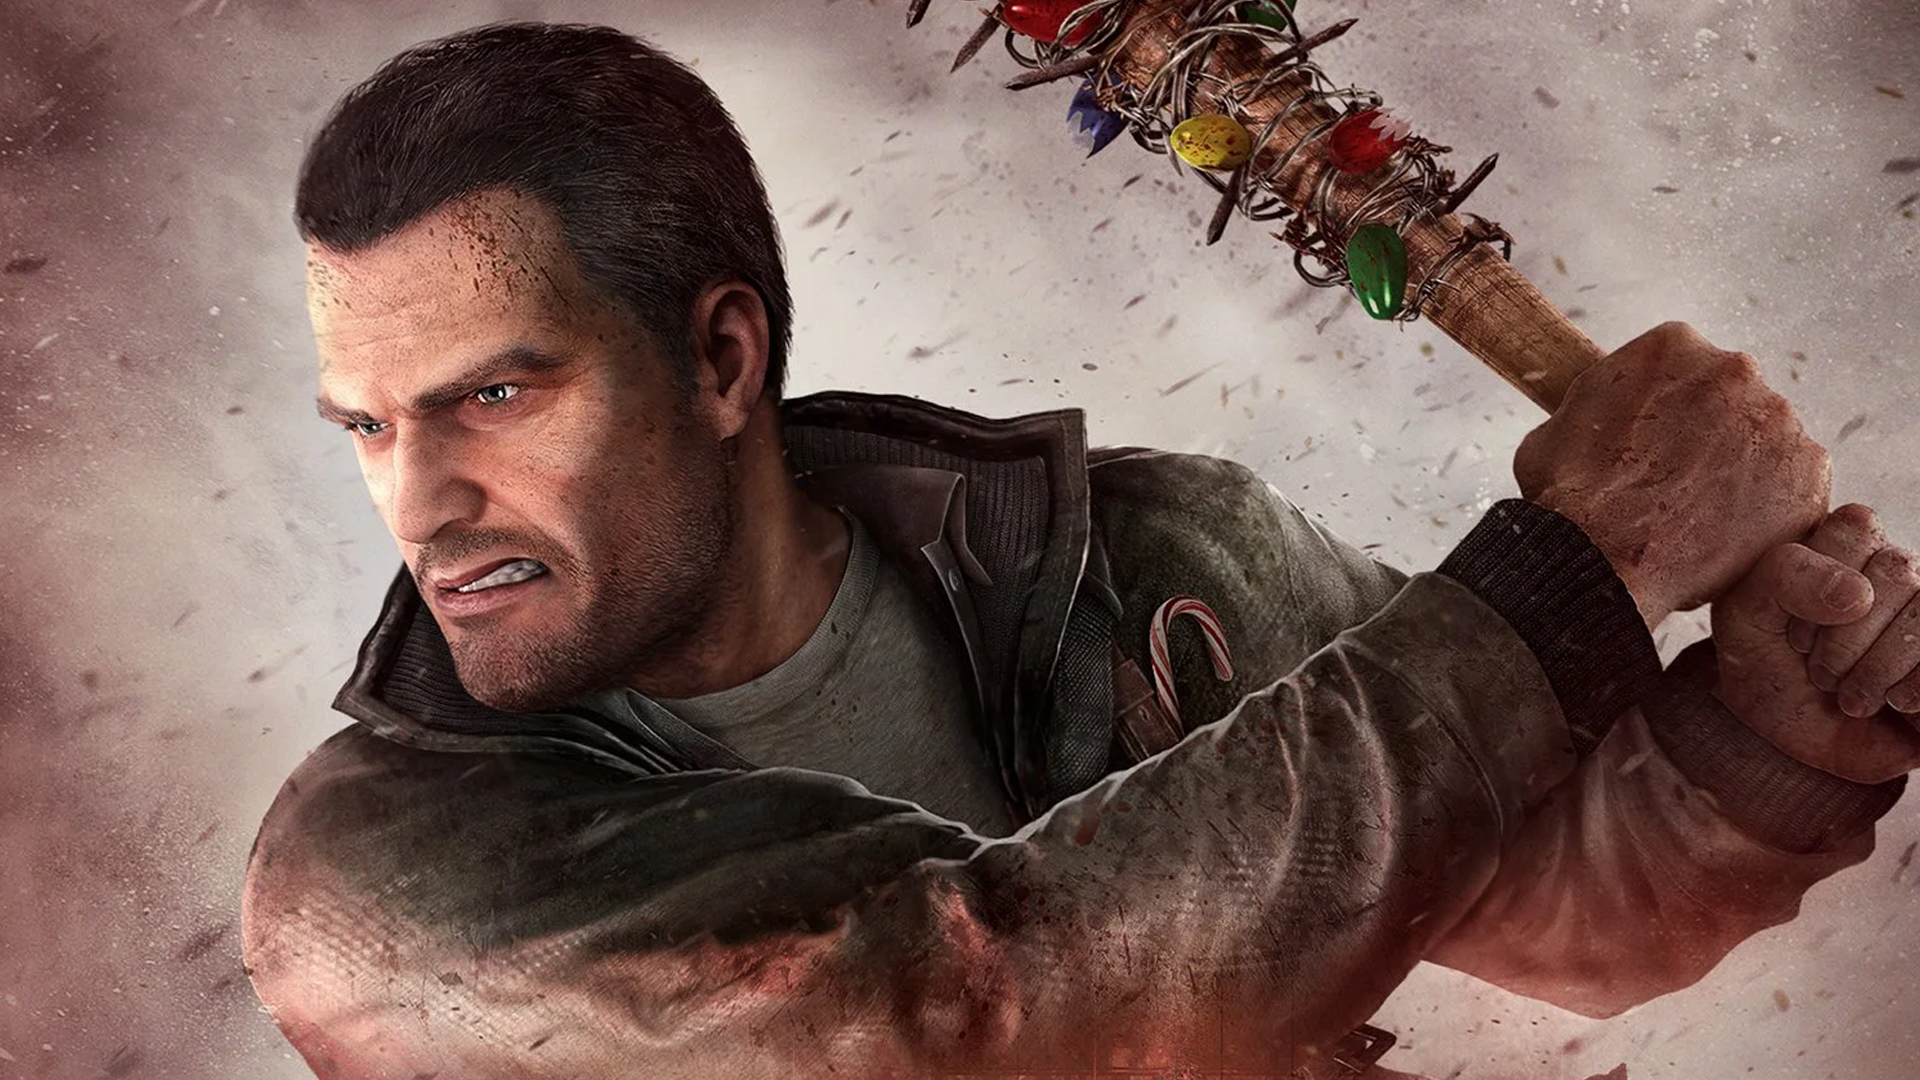 Development Footage From the Cancelled 'Dead Rising 5' Appears